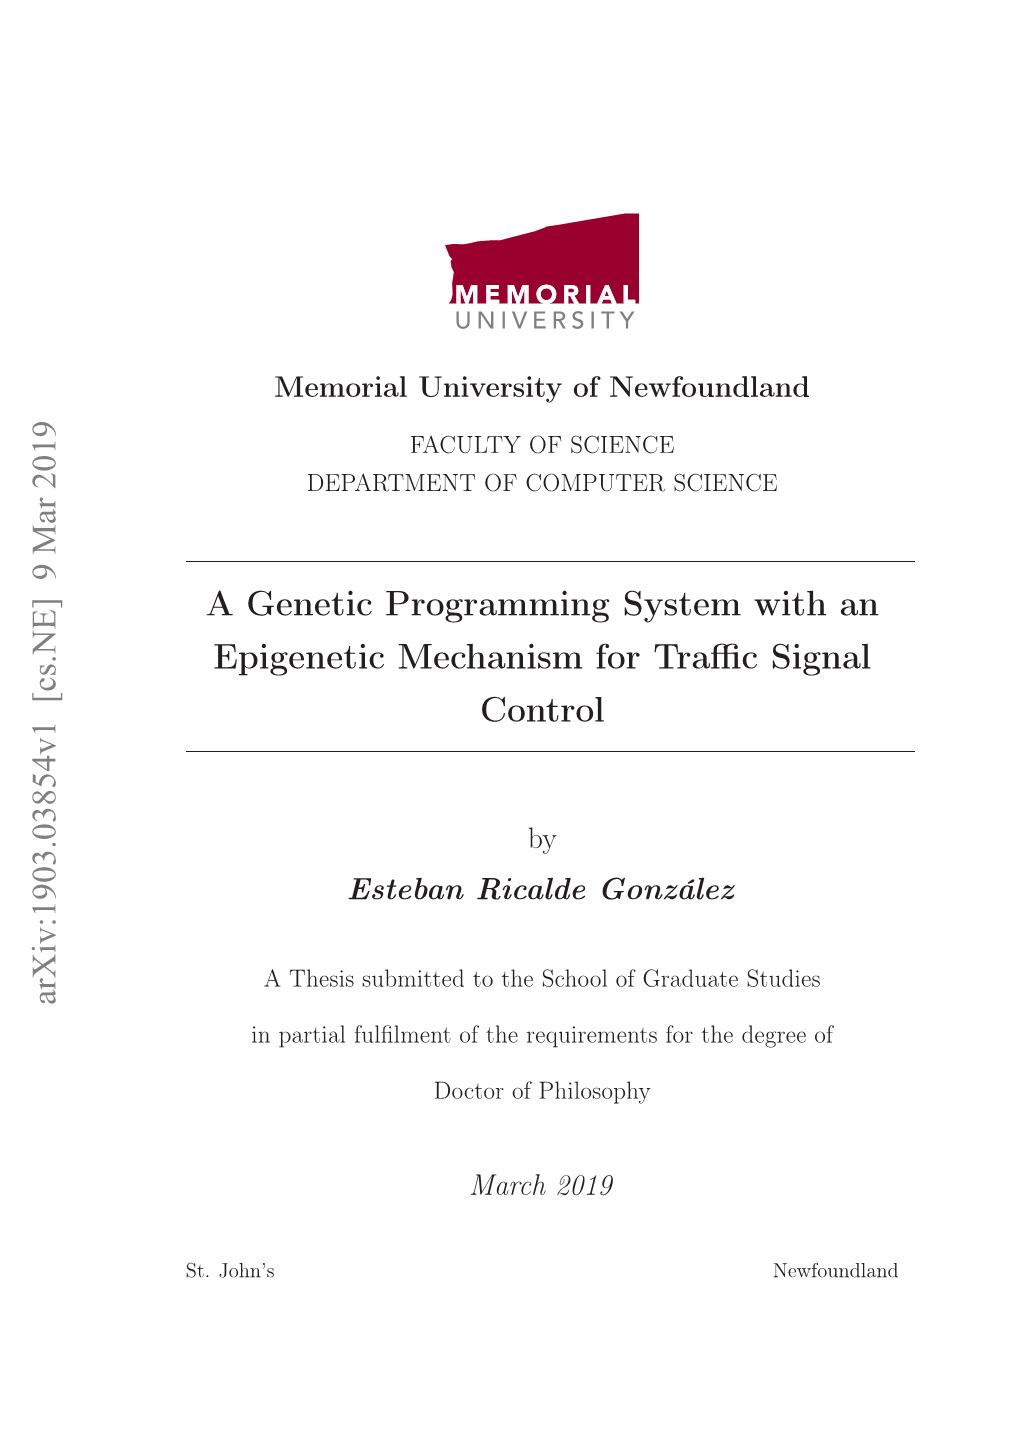 A Genetic Programming System with an Epigenetic Mechanism for Traffic